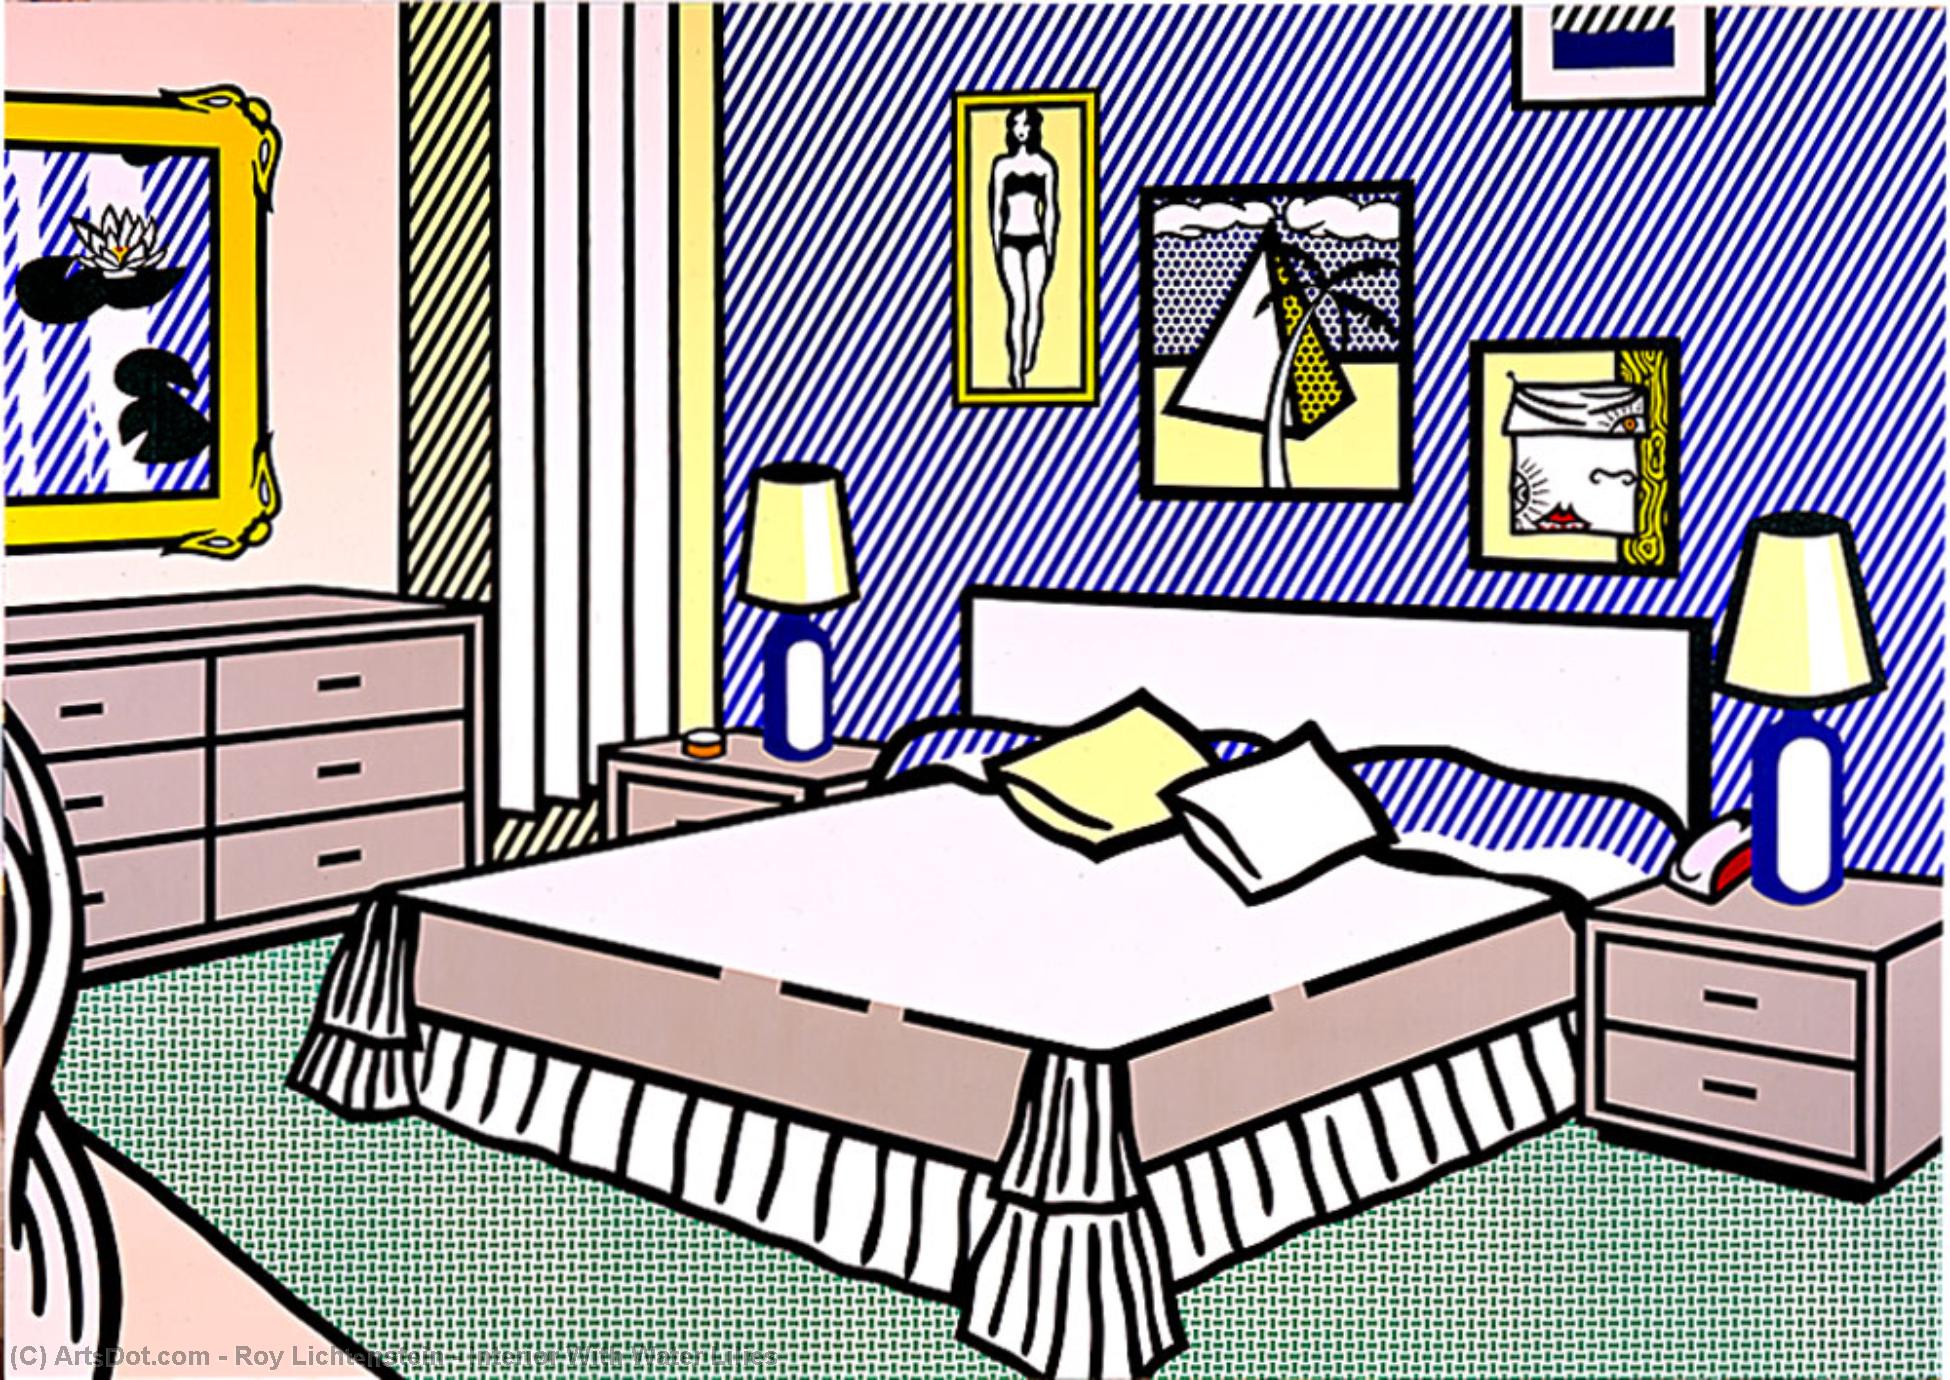 Order Paintings Reproductions Interior With Water Lilies, 1991 by Roy Lichtenstein (Inspired By) (1923-1997, United States) | ArtsDot.com